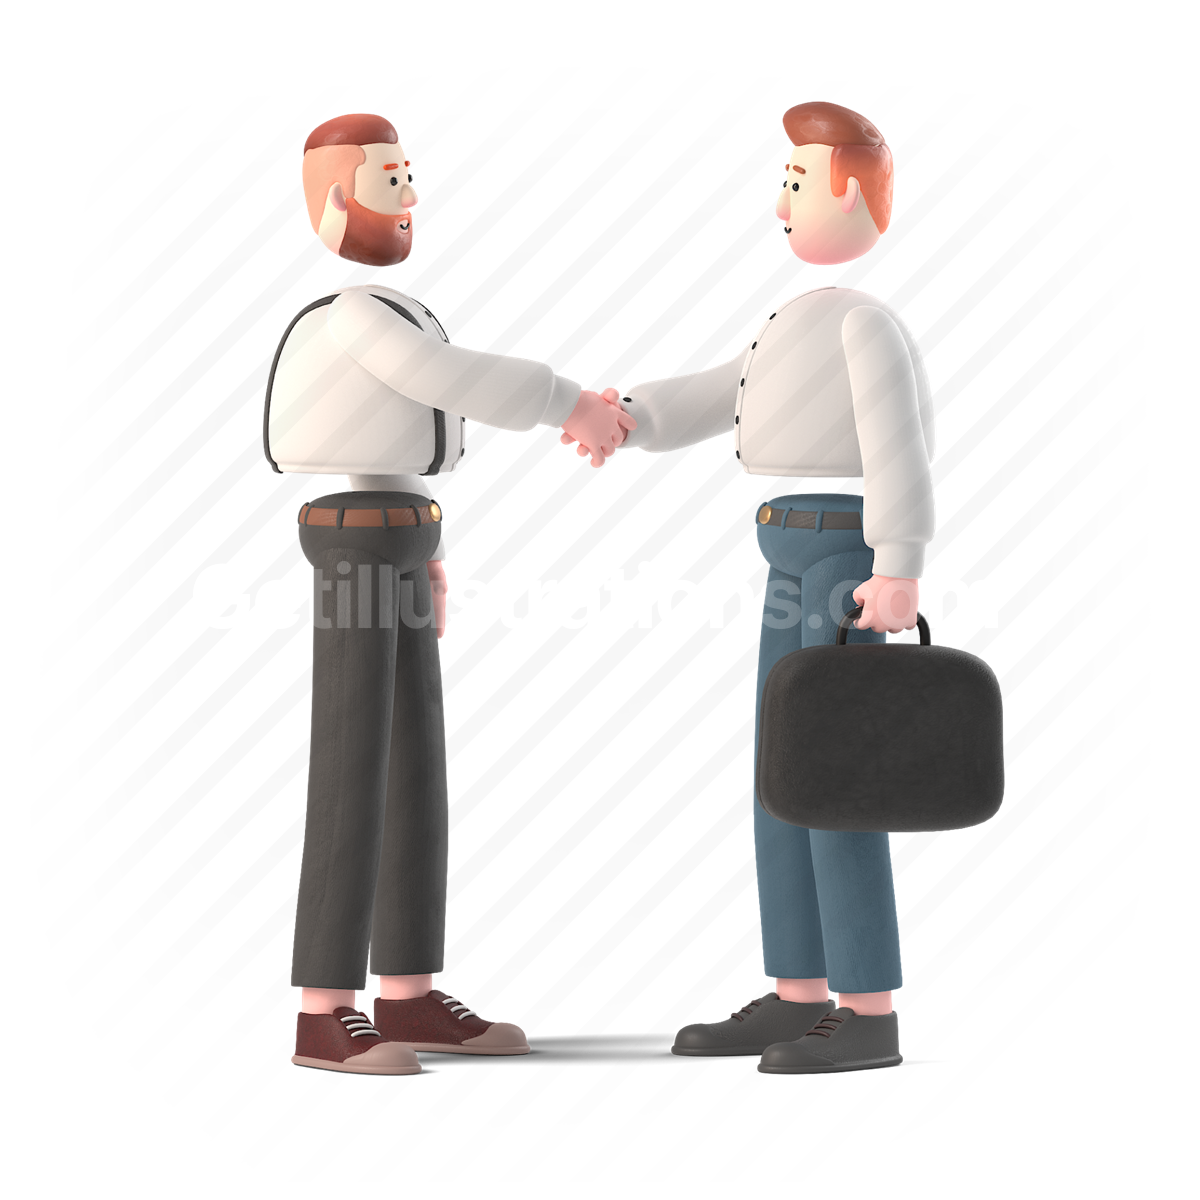 3d, people, person, handshake, shake, agreement, contract, man